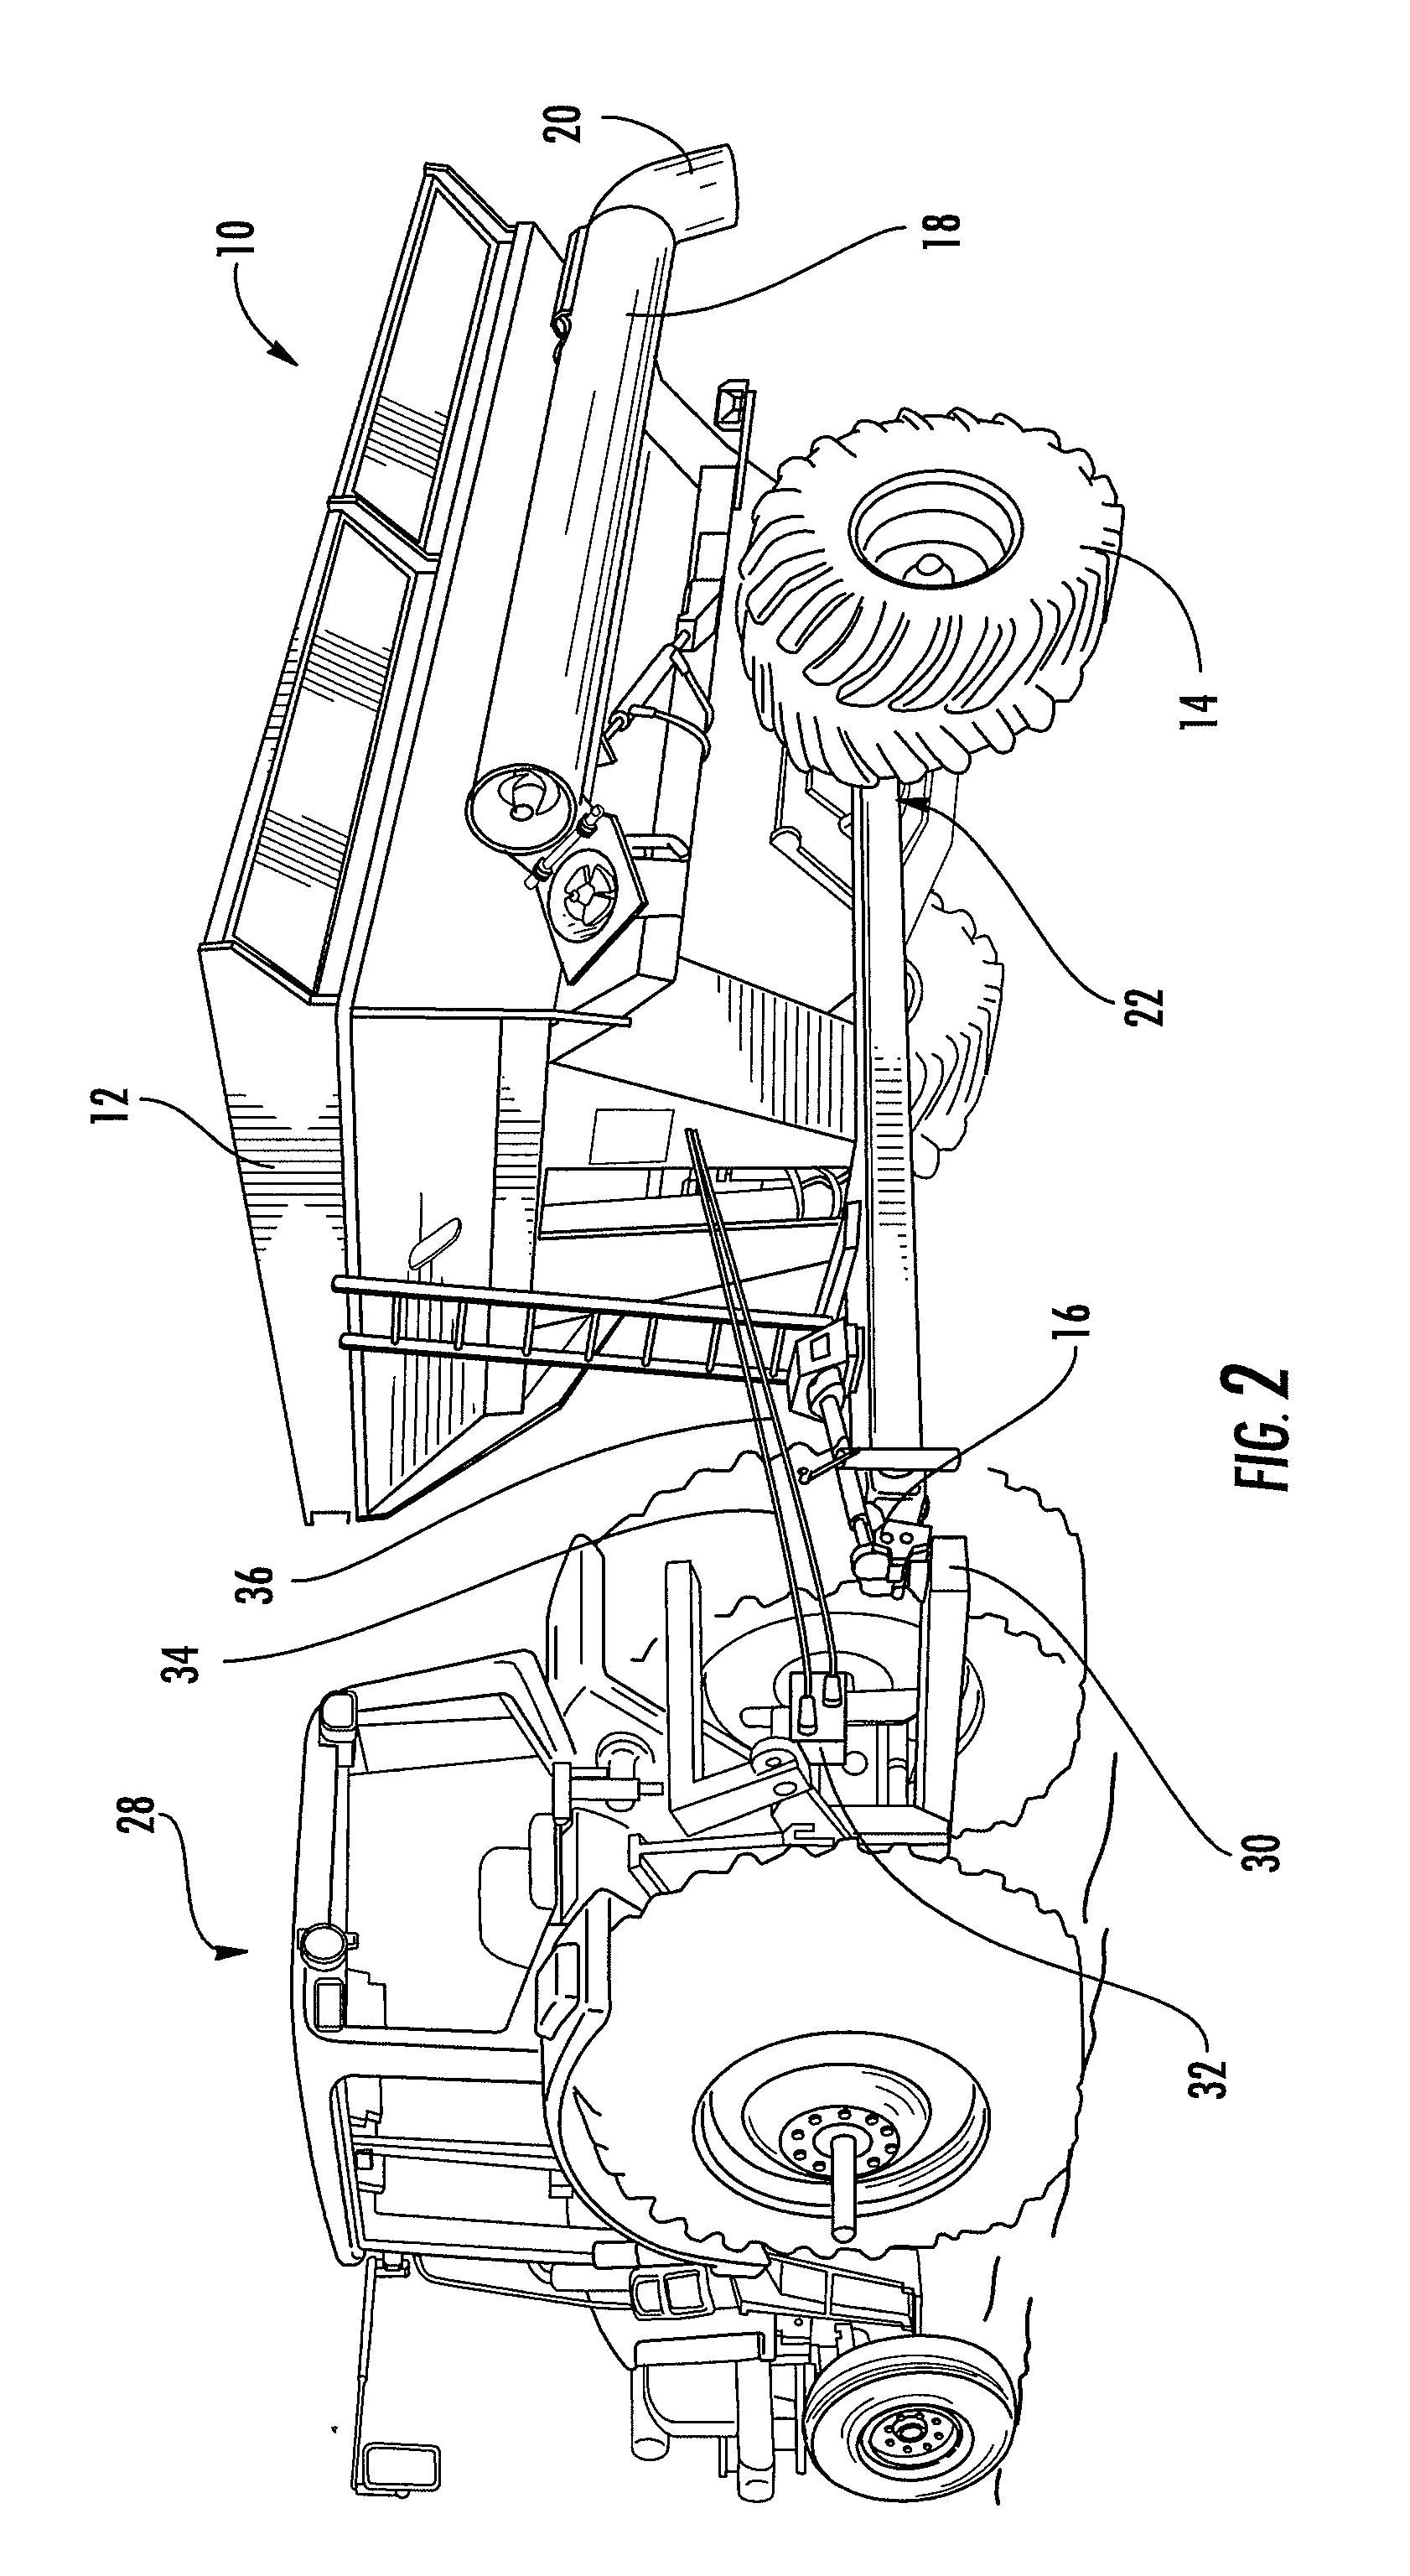 Hydraulic system having manifold with remote control for grain cart